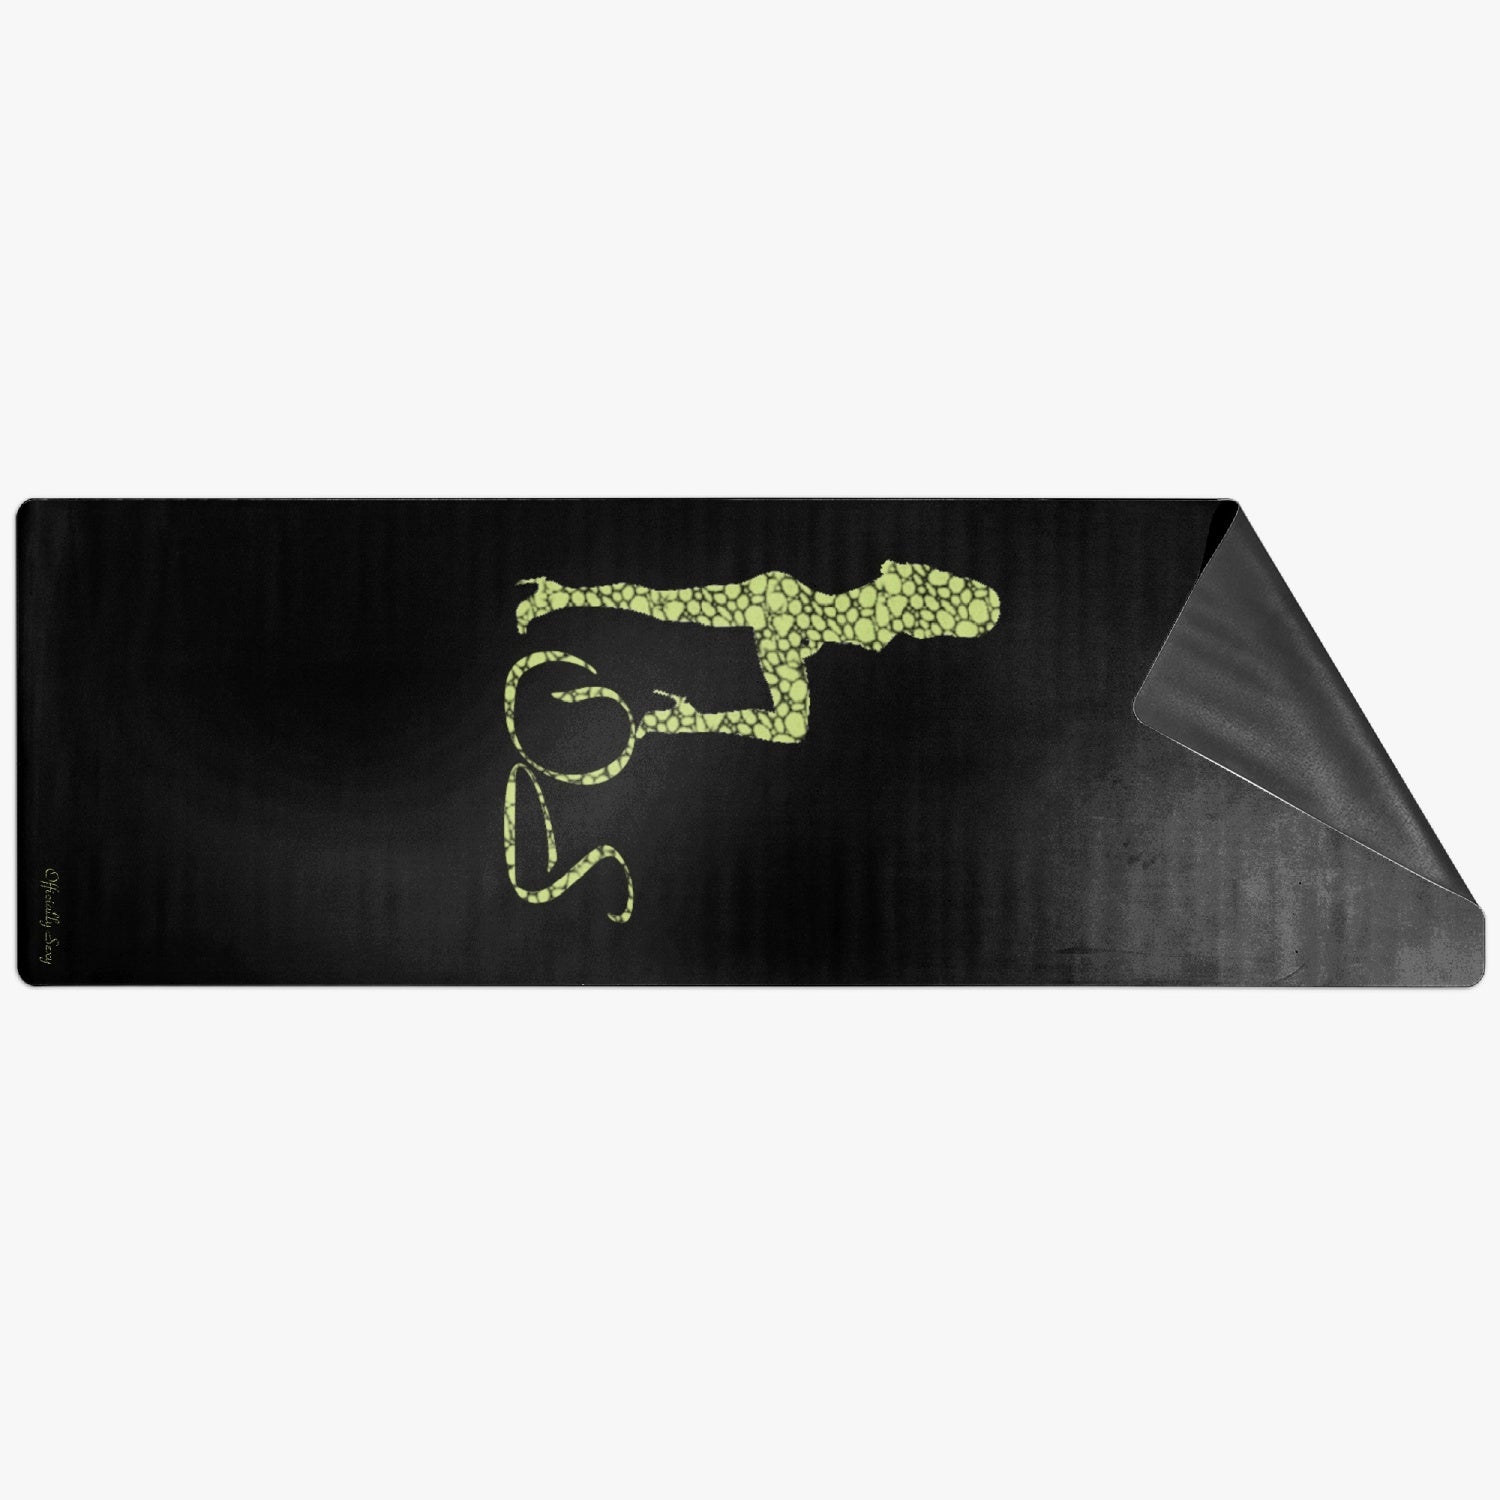 Officially Sexy Neon Green AM 270 Suede Anti-slip Yoga Mat 4